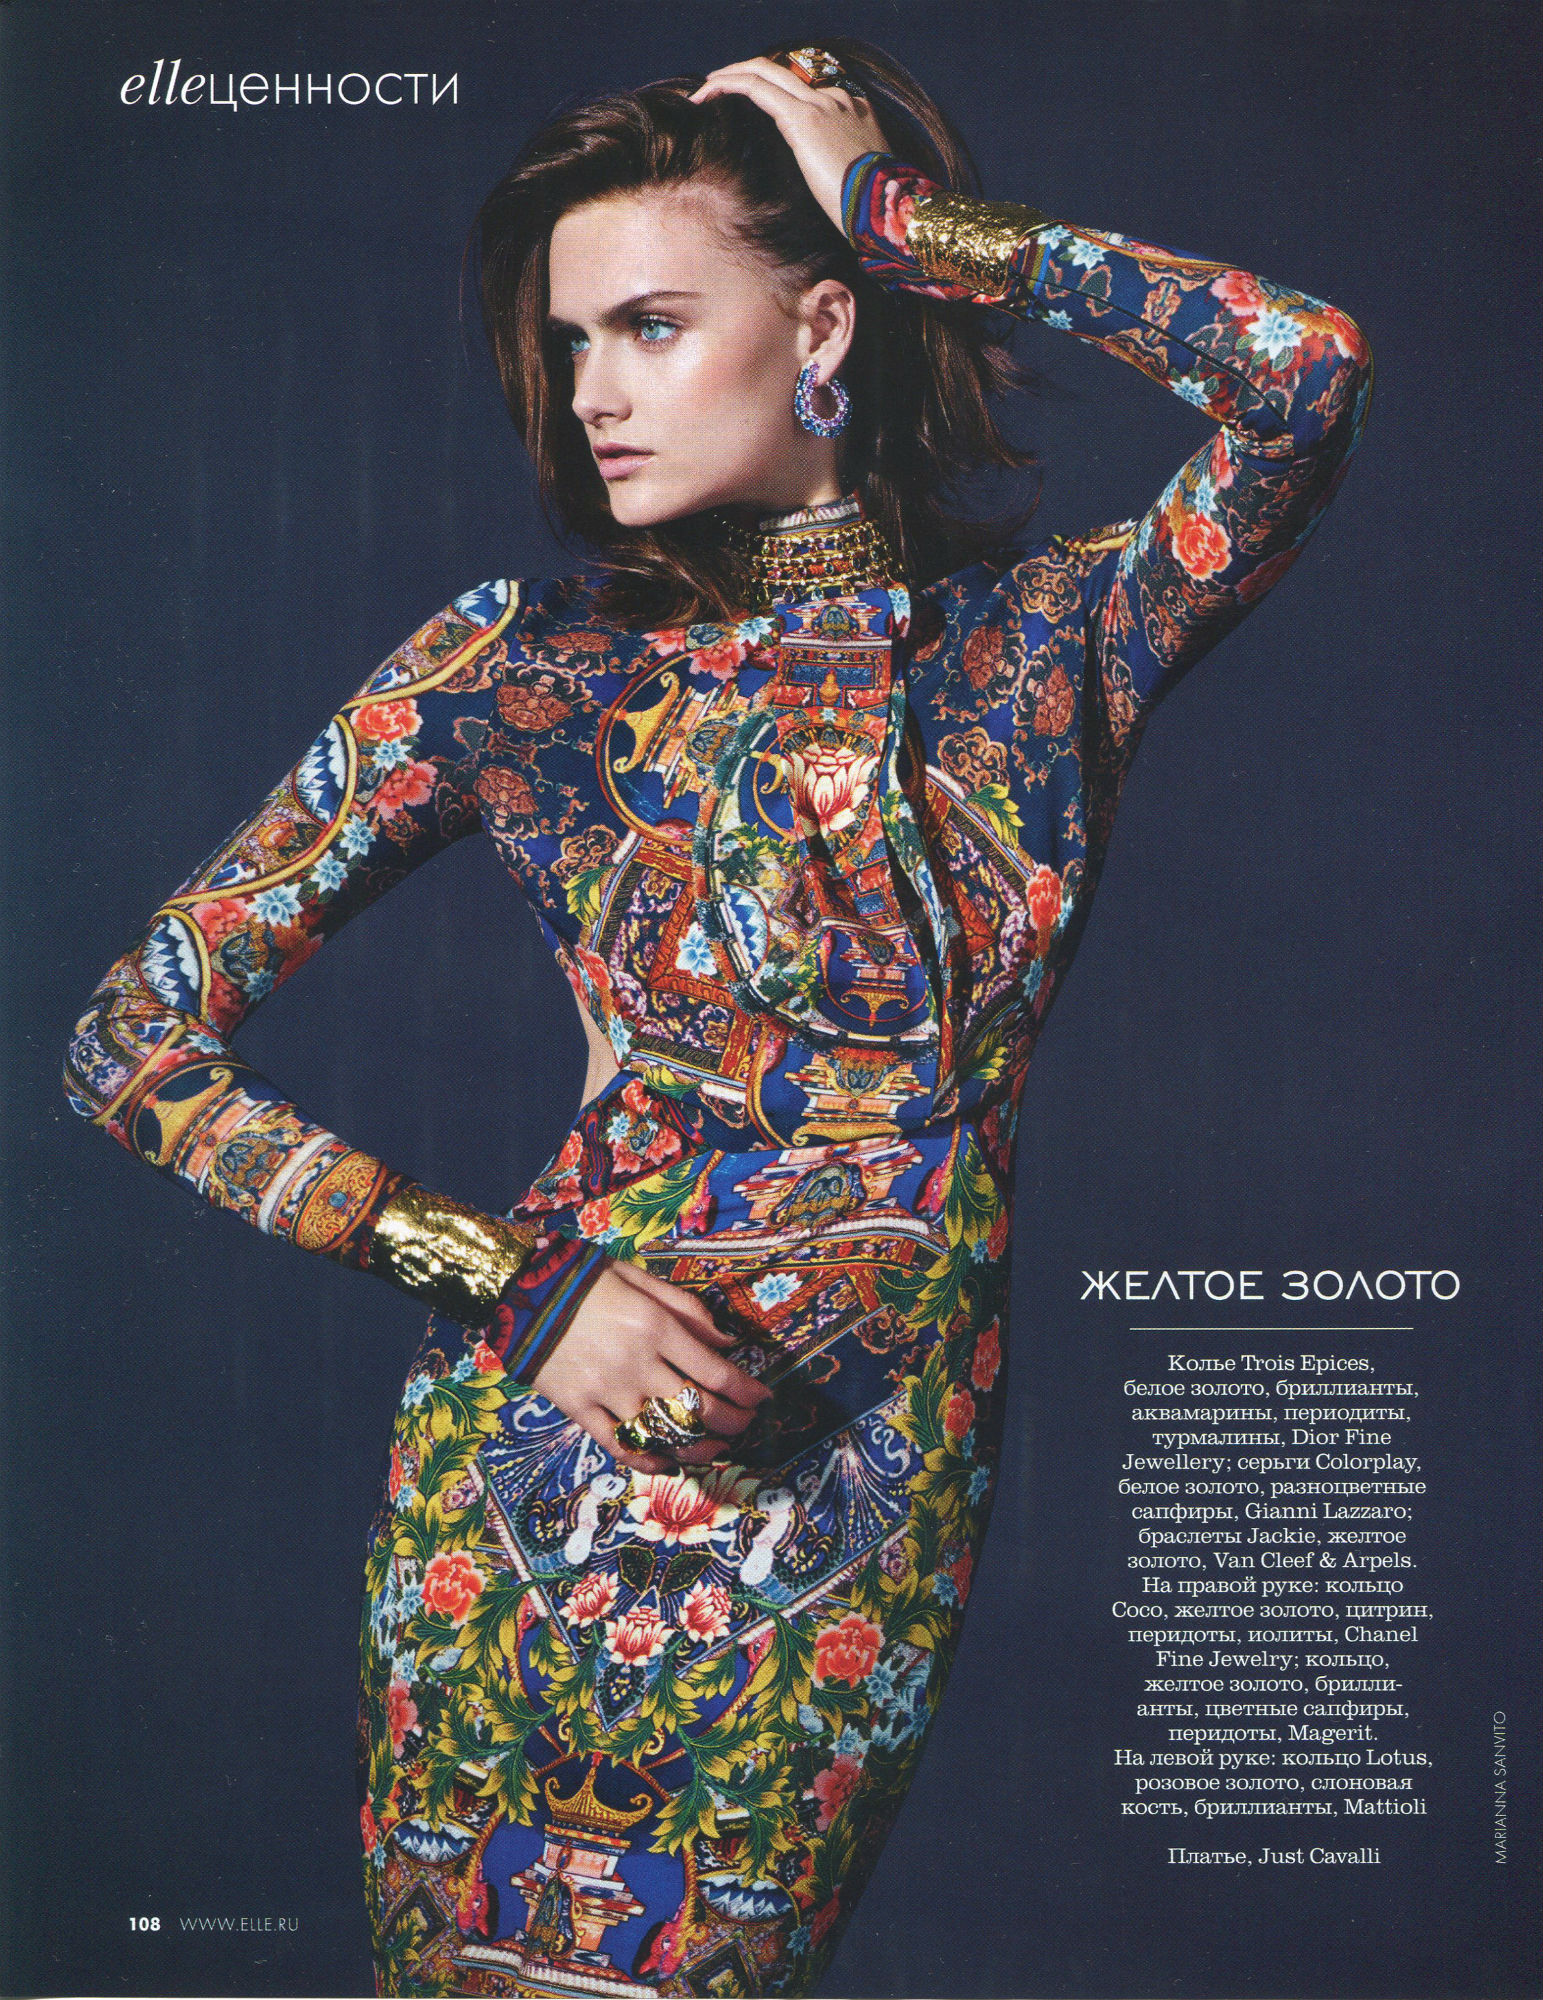 lady luxe: karlie kloss by mario testino for vogue uk march 2012